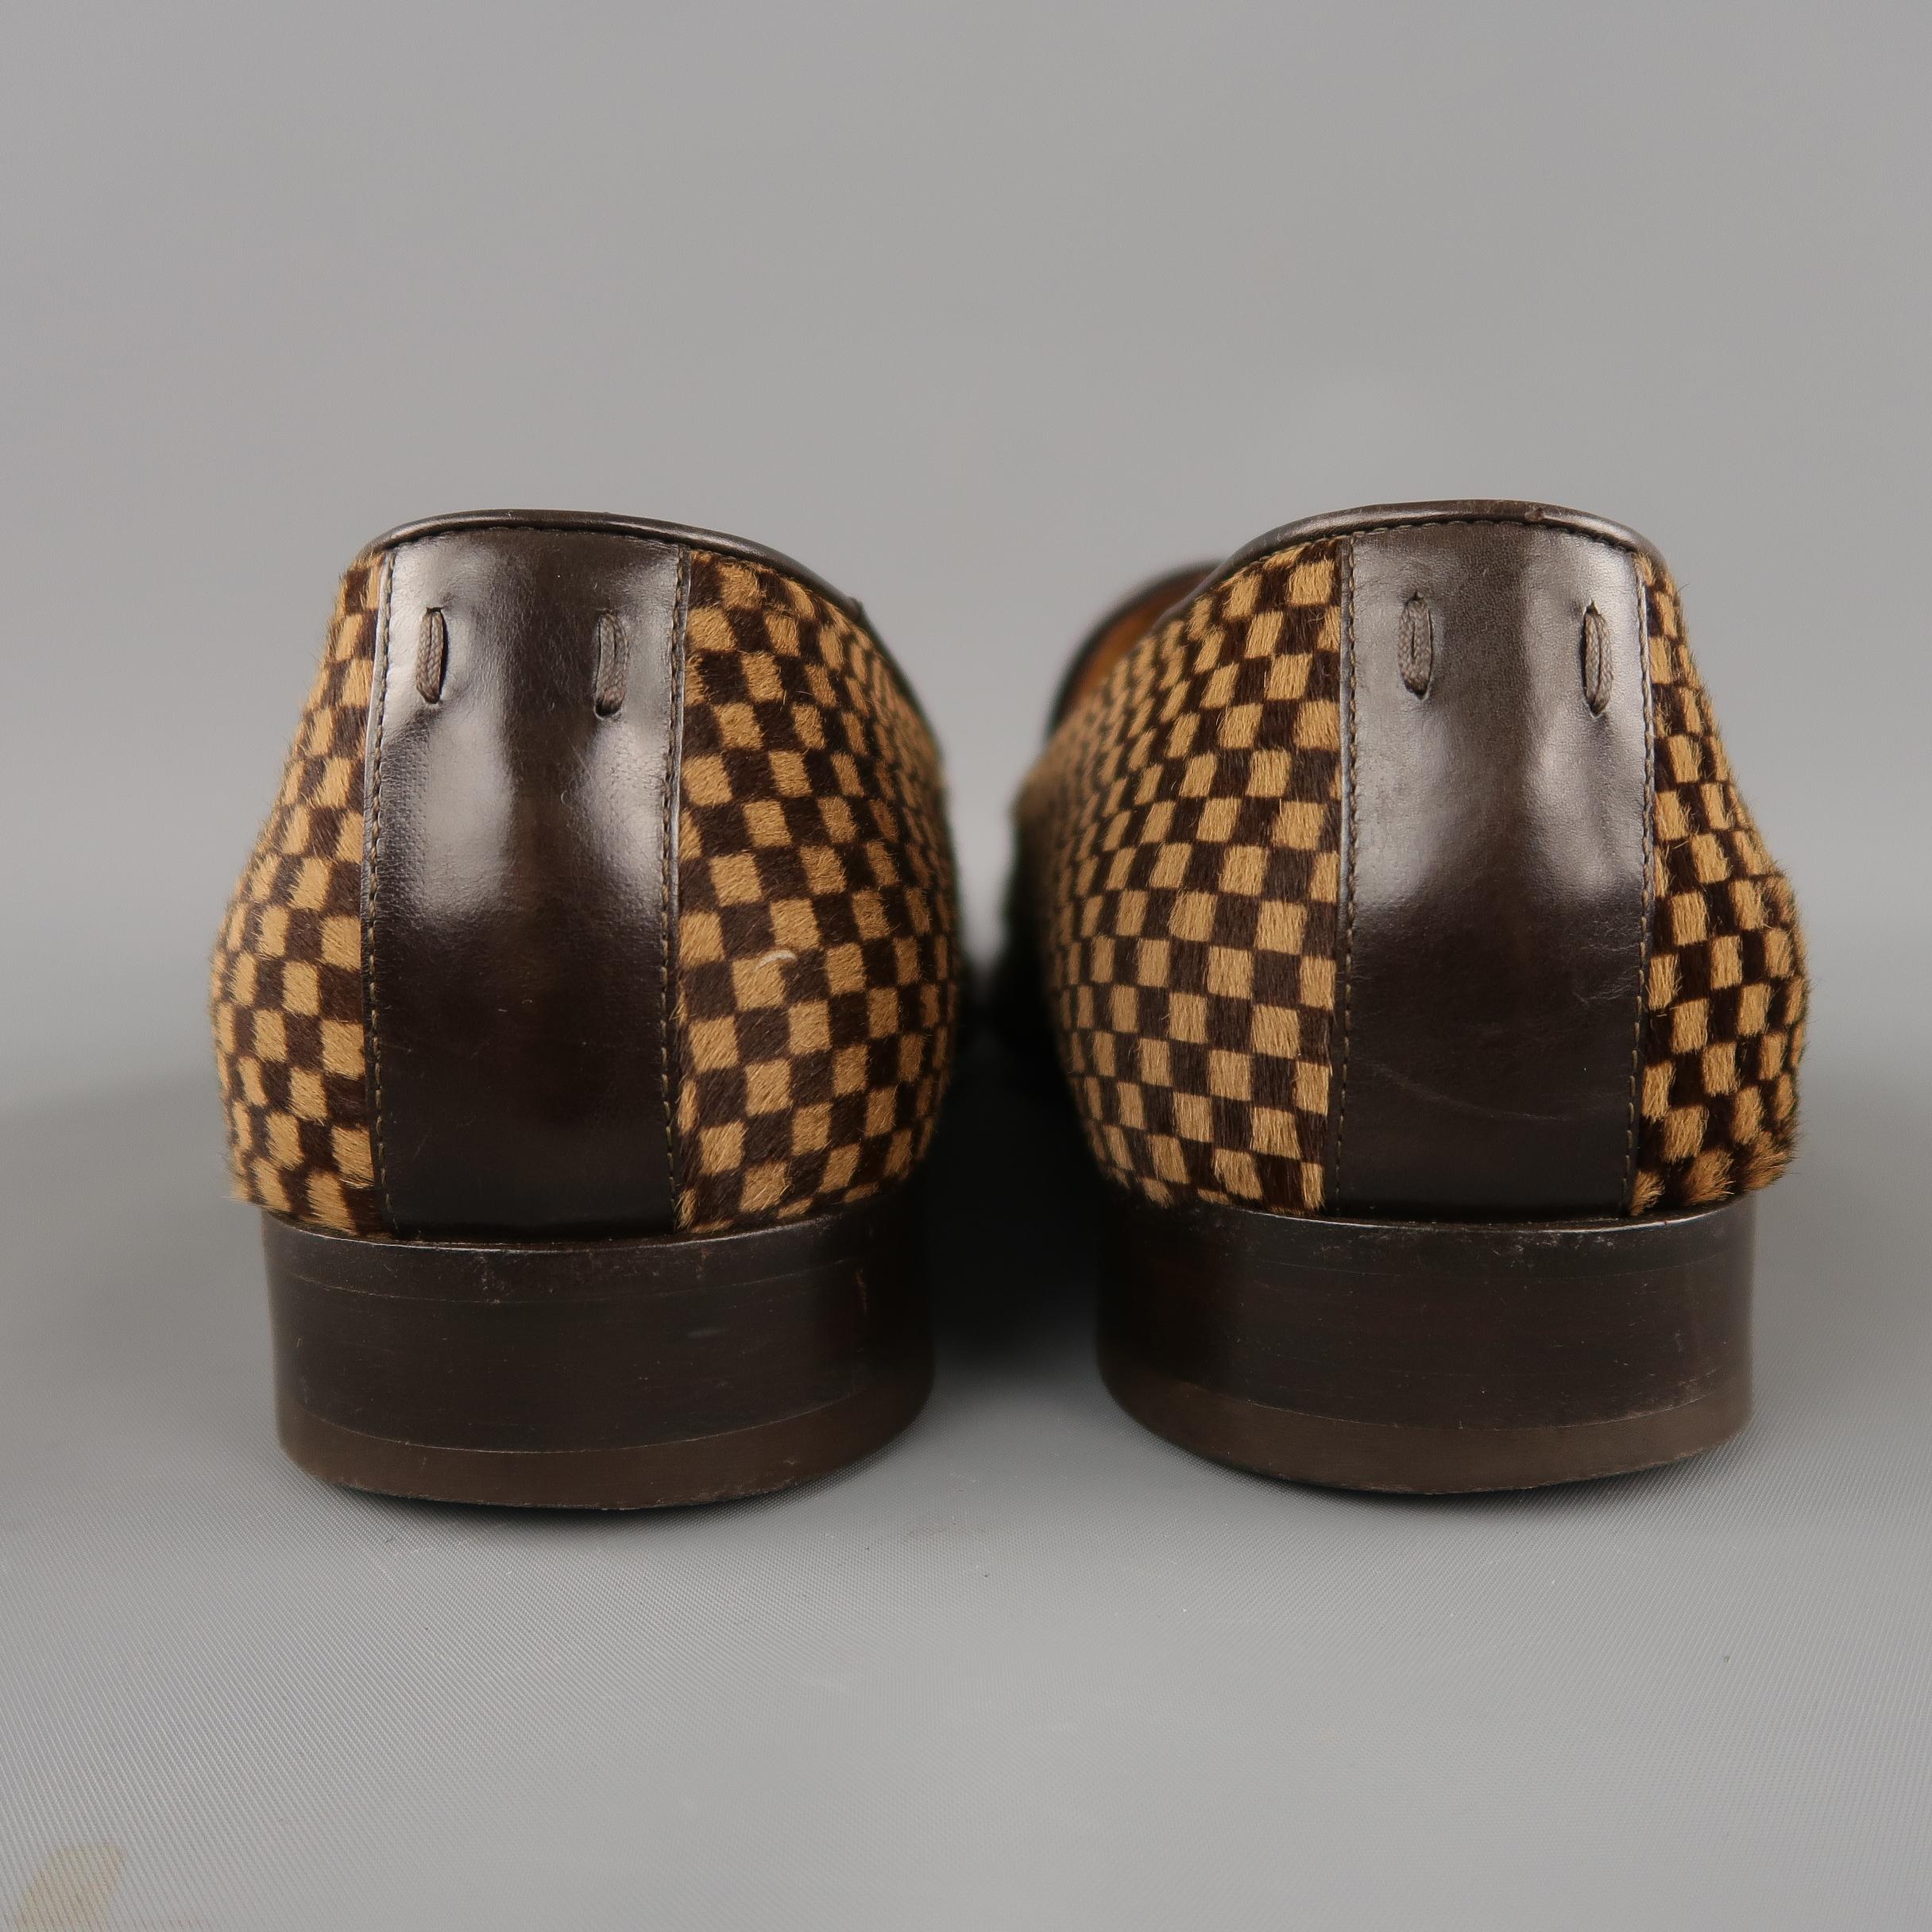 LOUIS VUITTON Size 11.5 Brown & Tan Damier Checkered Pony Hair Loafers Shoes 1